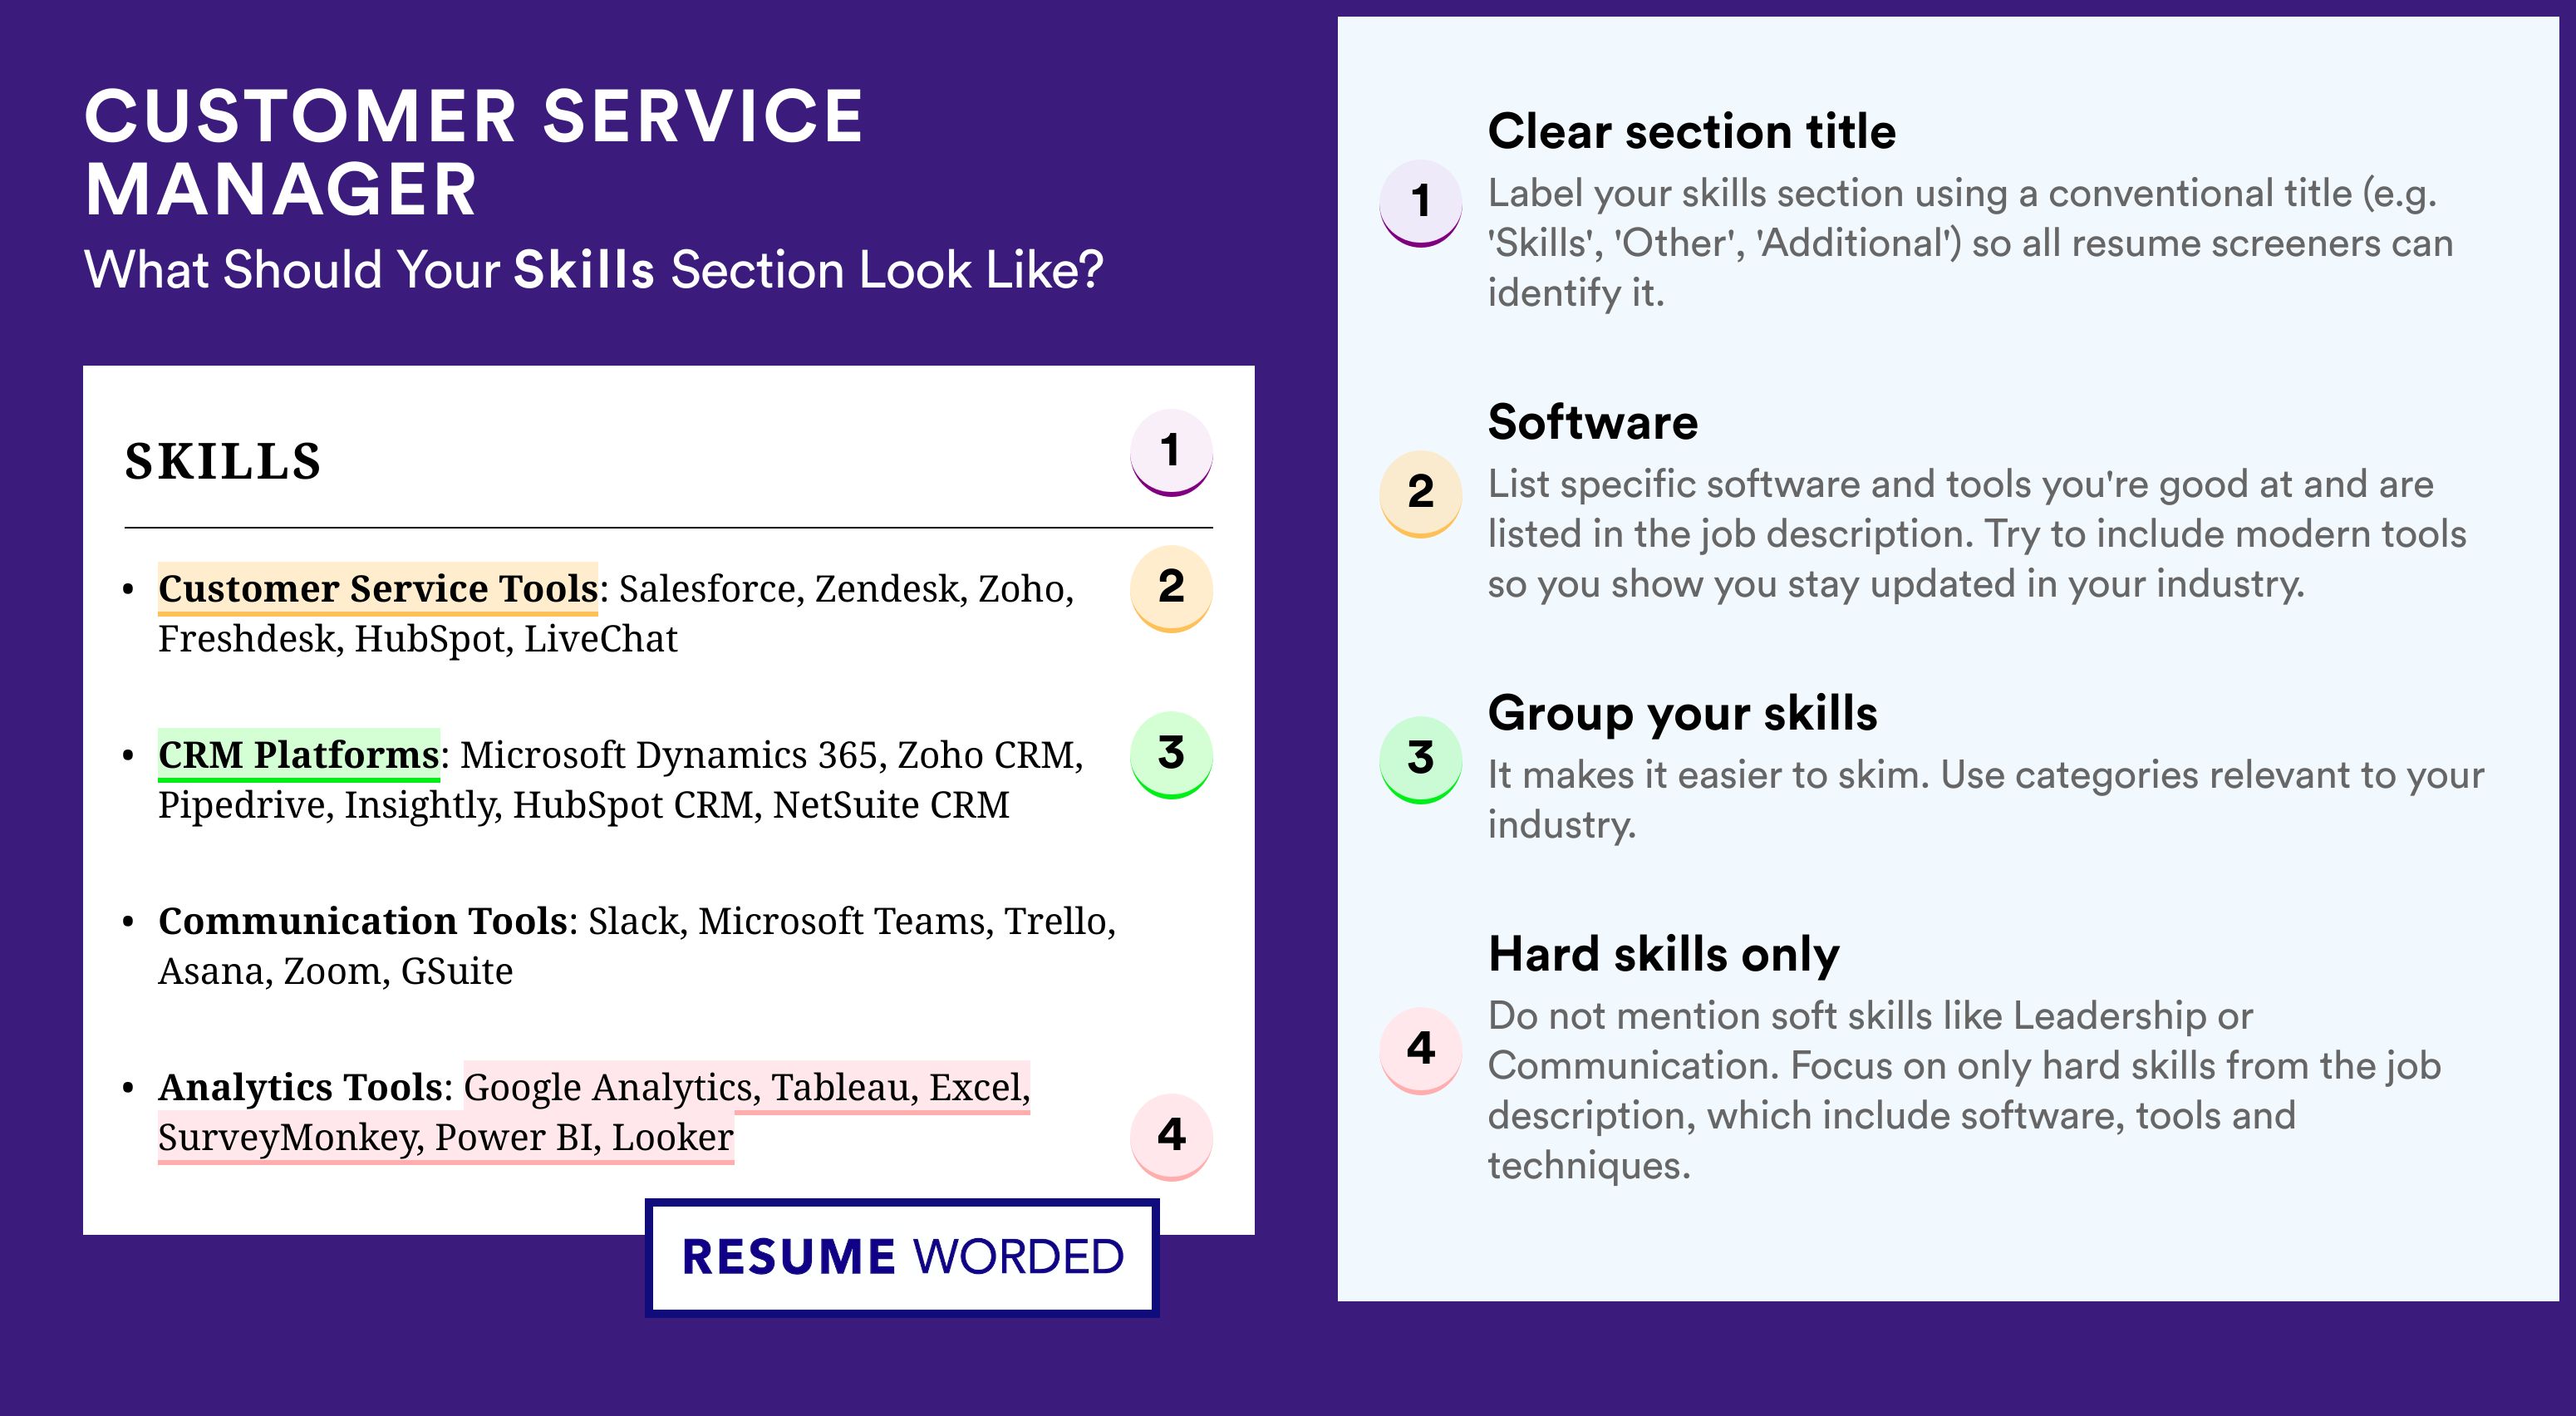 How To Write Your Skills Section - Customer Service Manager Roles